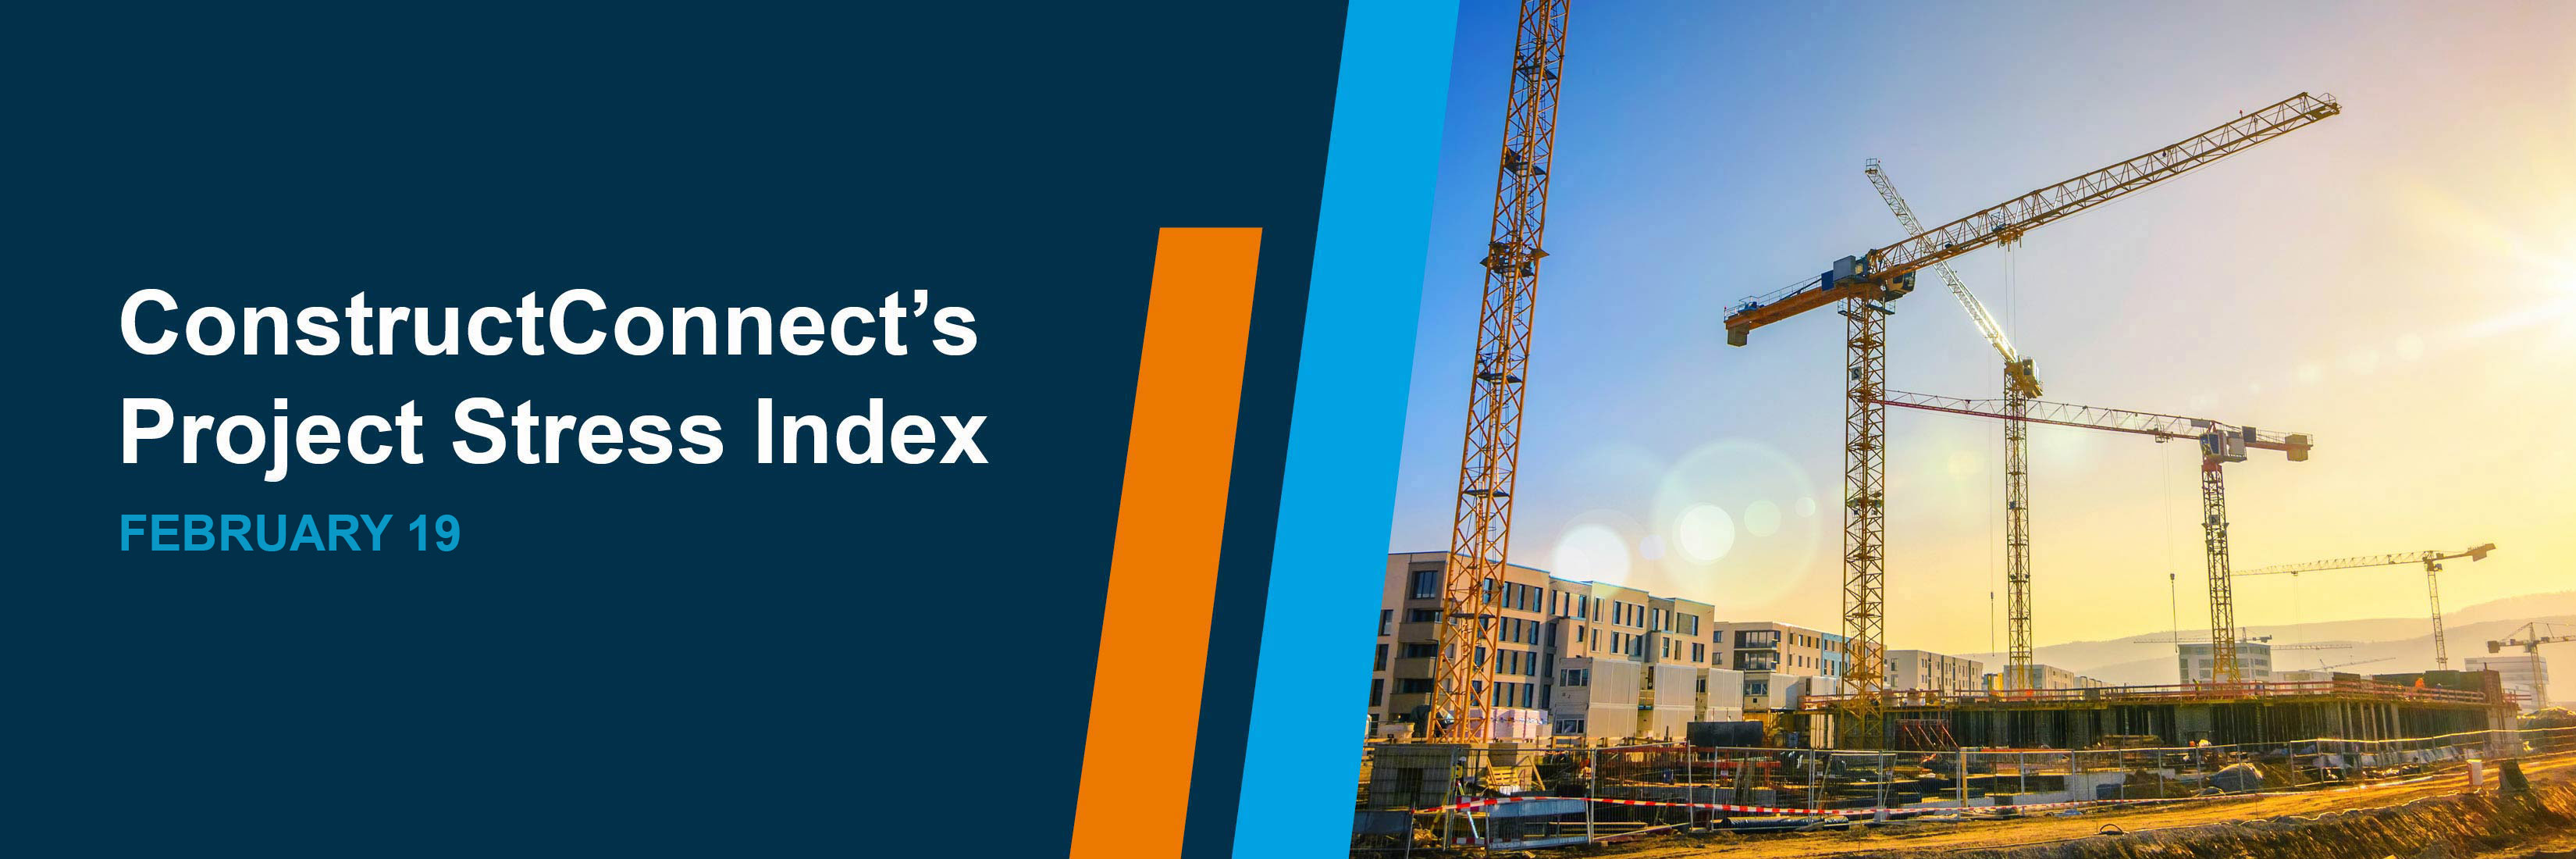 ConstructConnect's Project Stress Index - February 19